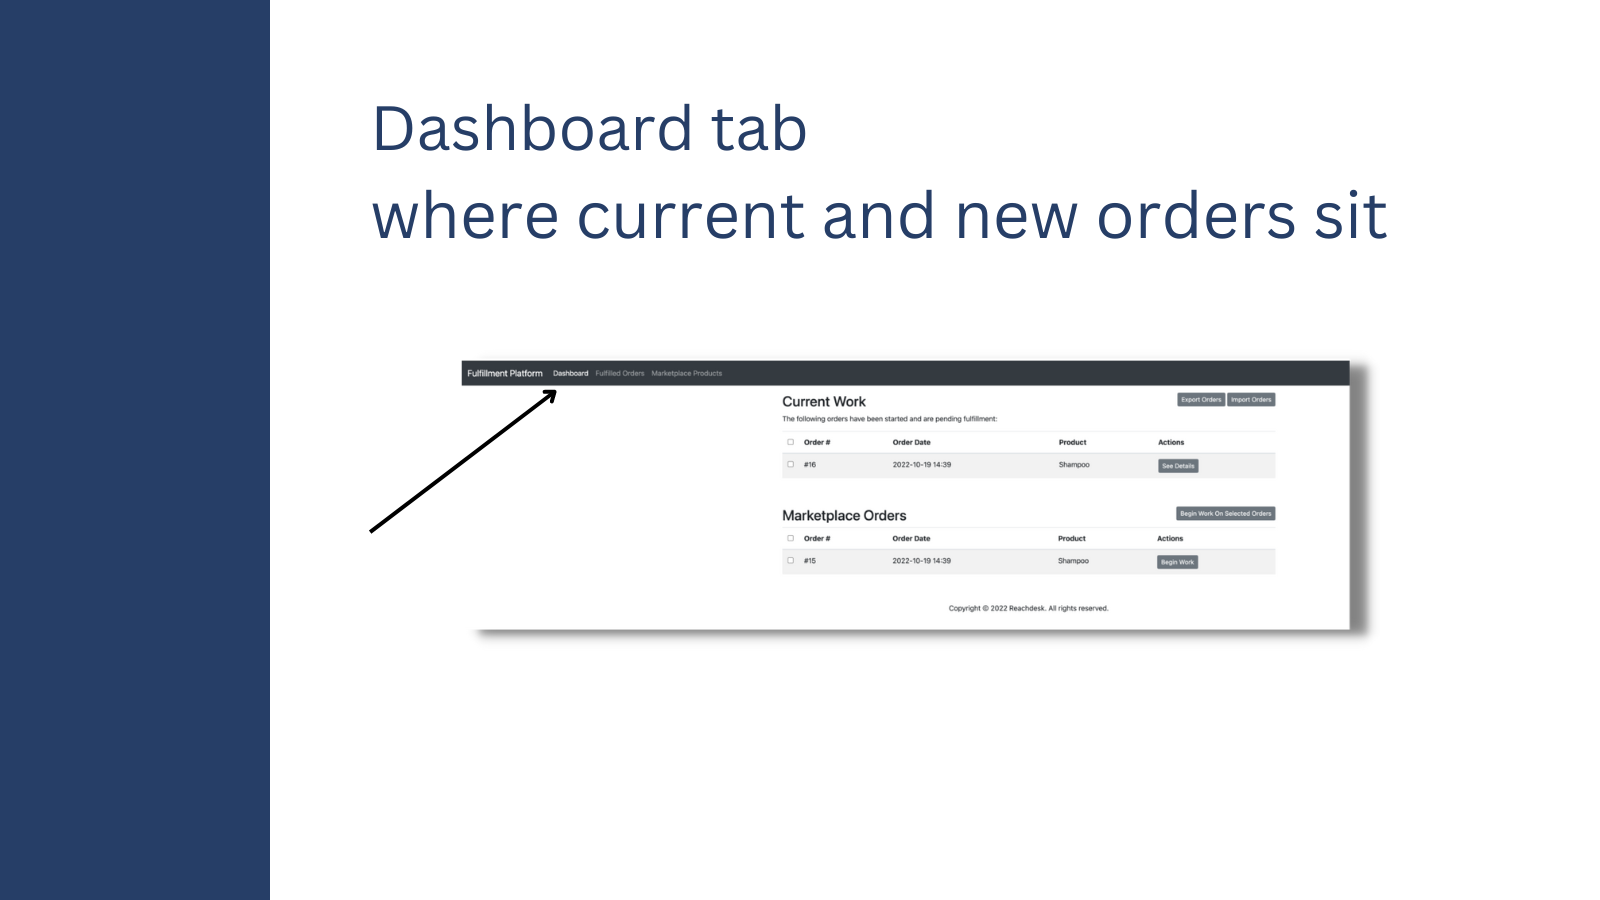 Dashboard tab - where current and new orders sit